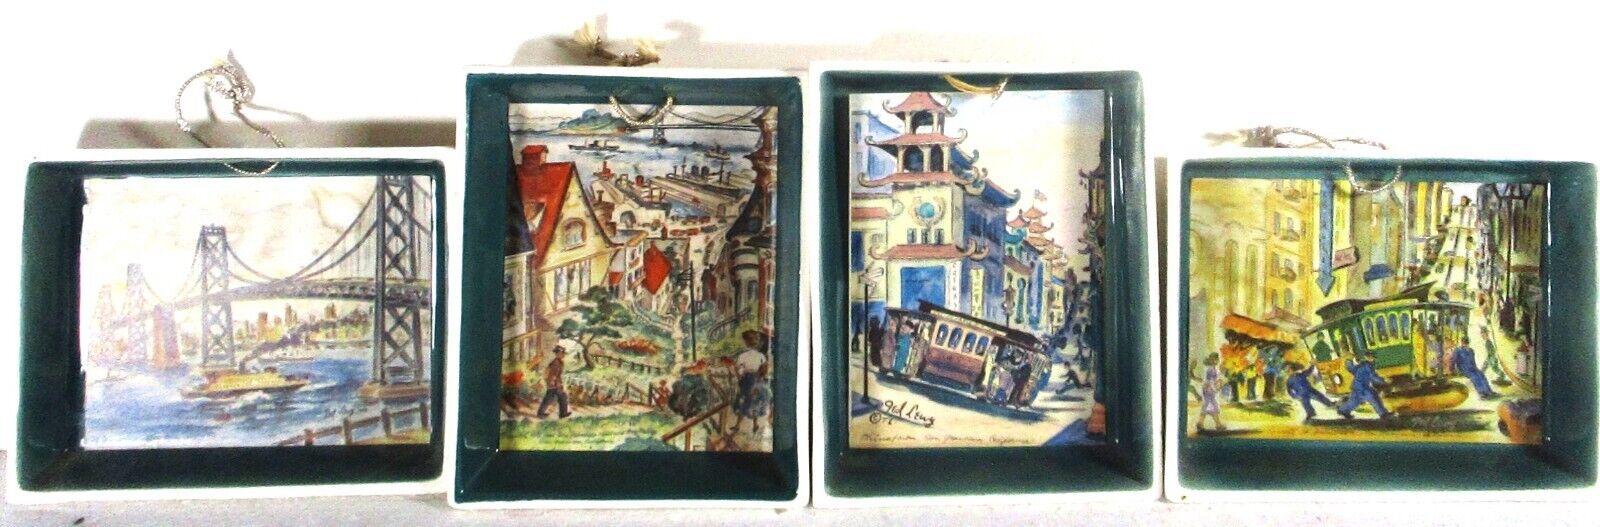 MID-CENTURY 50'S-60'S TED LEVY ARTIST CERAMIC WALL PLAQUES, SAN FRANCISCO VIEWS